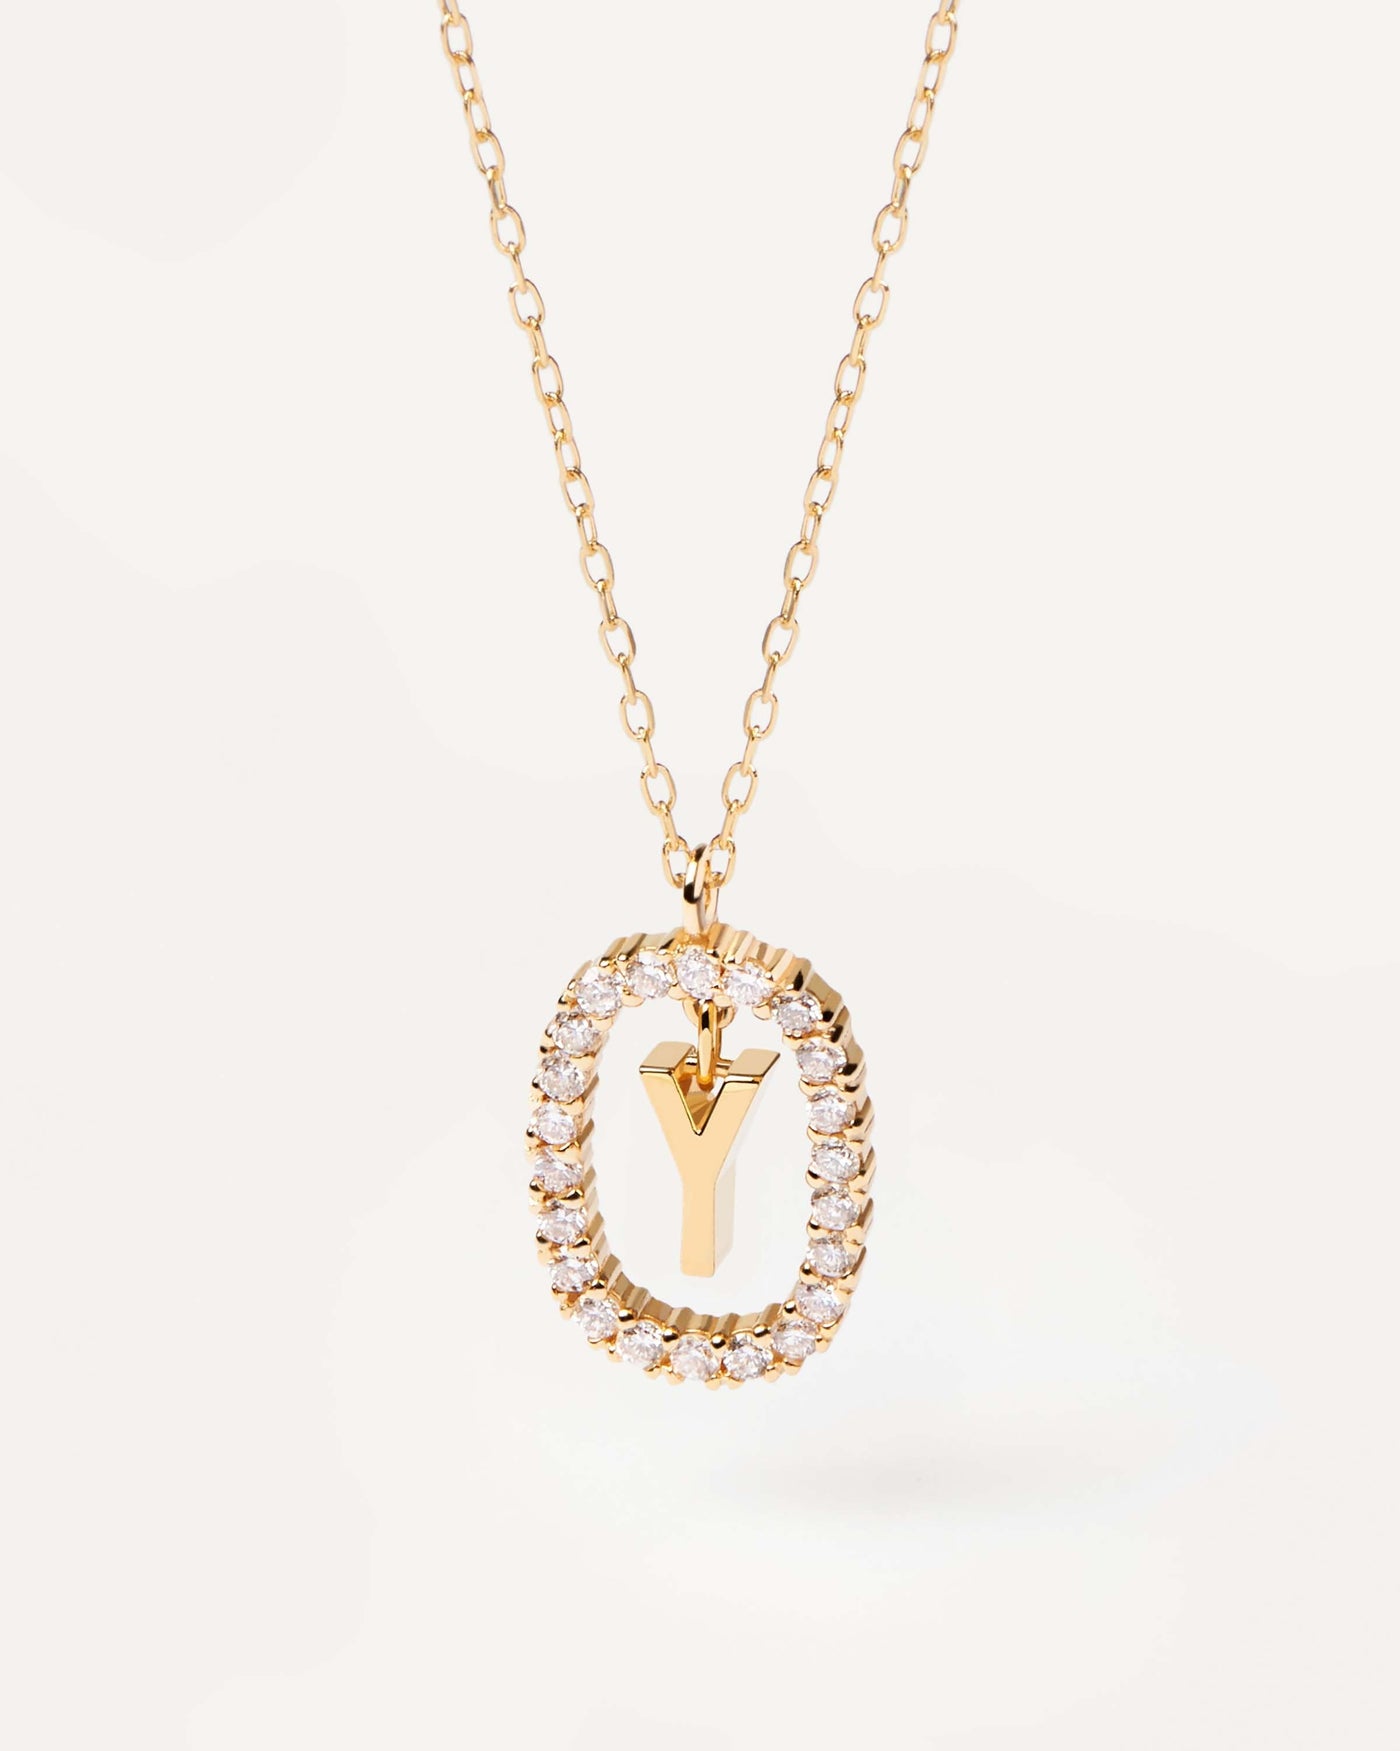 2023 Selection | Diamonds and Gold Letter Y Necklace. Initial Y necklace in solid yellow gold, circled by 0.33 carats lab-grown diamonds. Get the latest arrival from PDPAOLA. Place your order safely and get this Best Seller. Free Shipping.